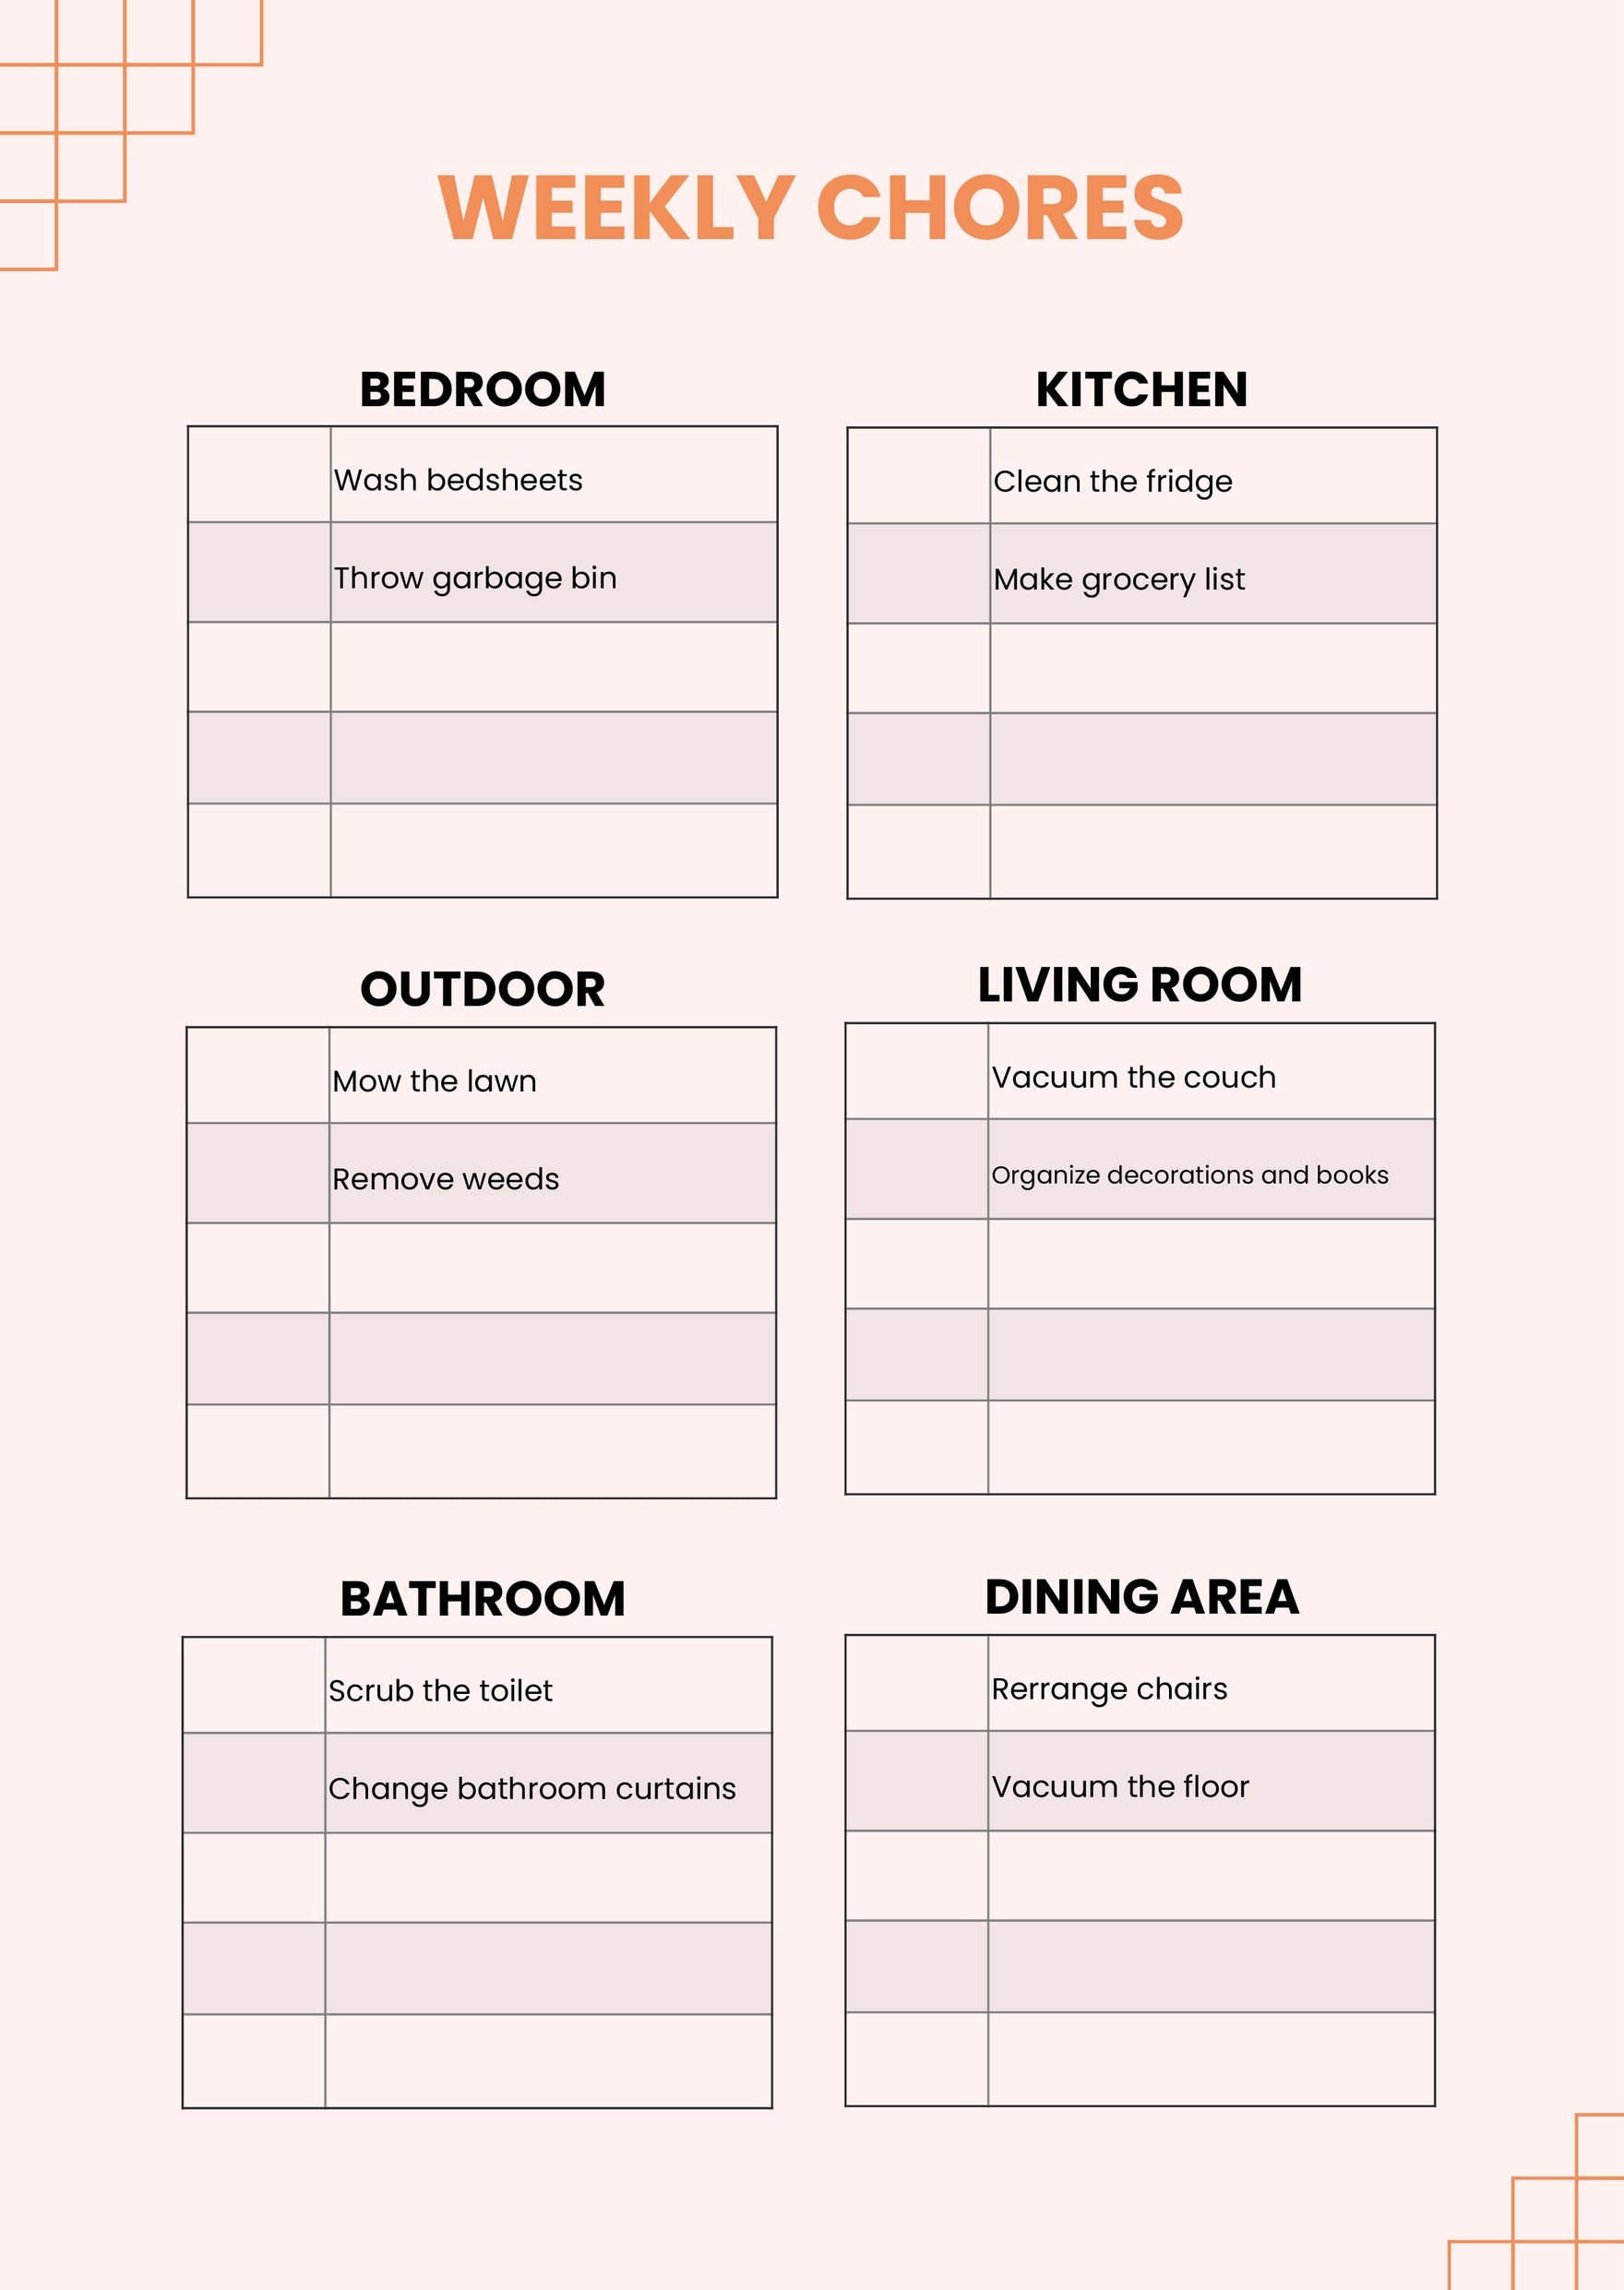 Weekly Adult Chore Chart in PDF, Illustrator